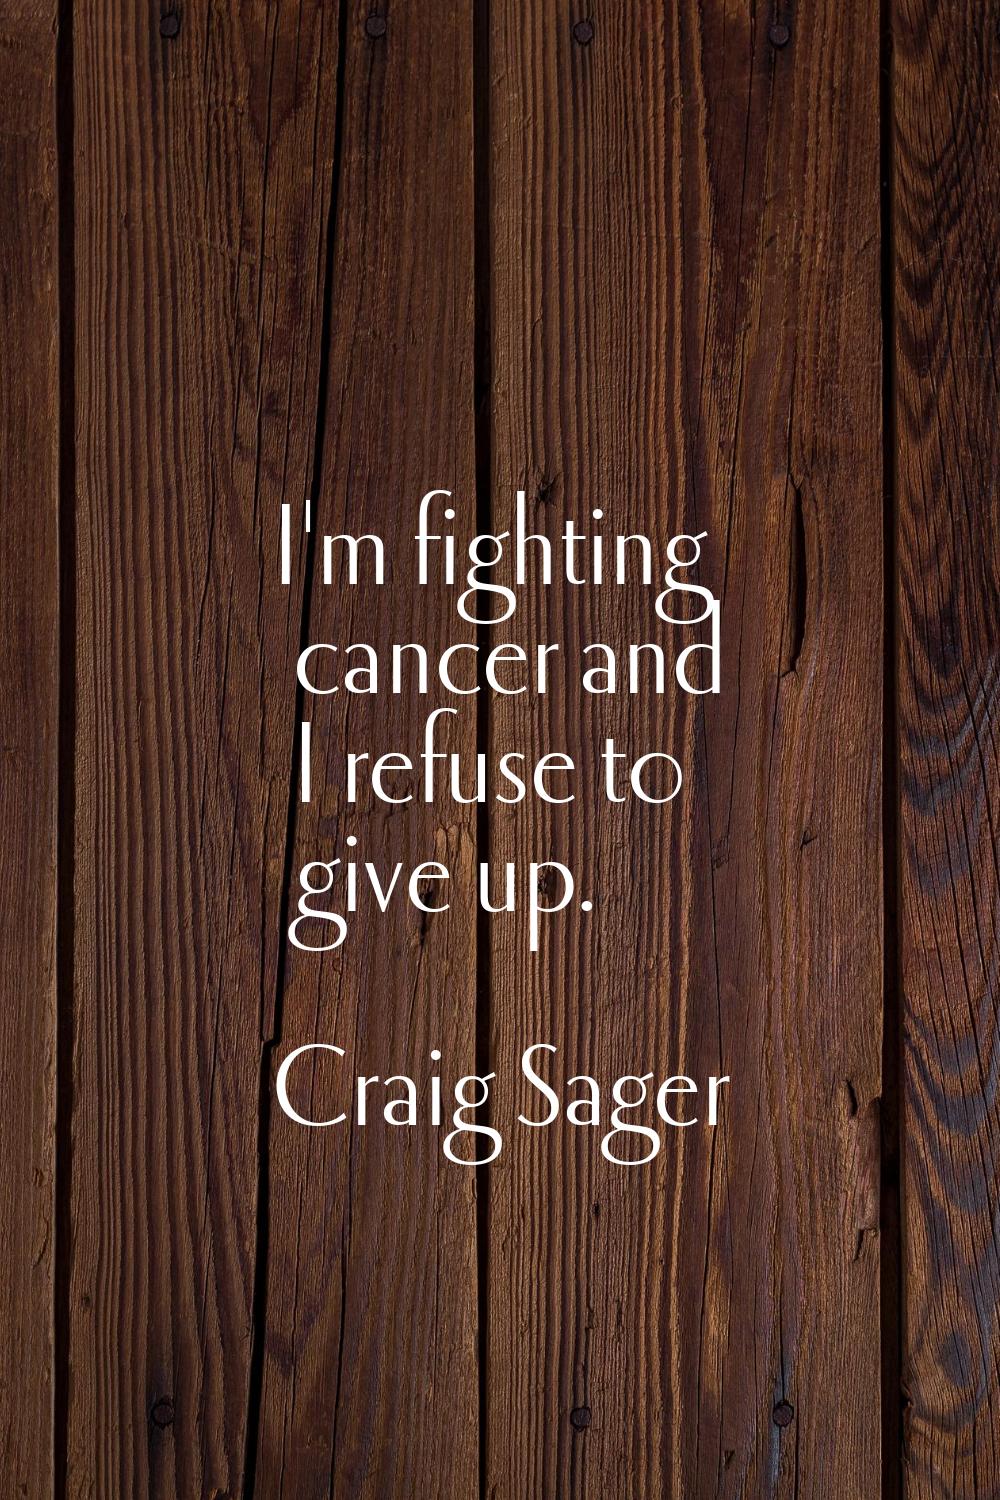 I'm fighting cancer and I refuse to give up.